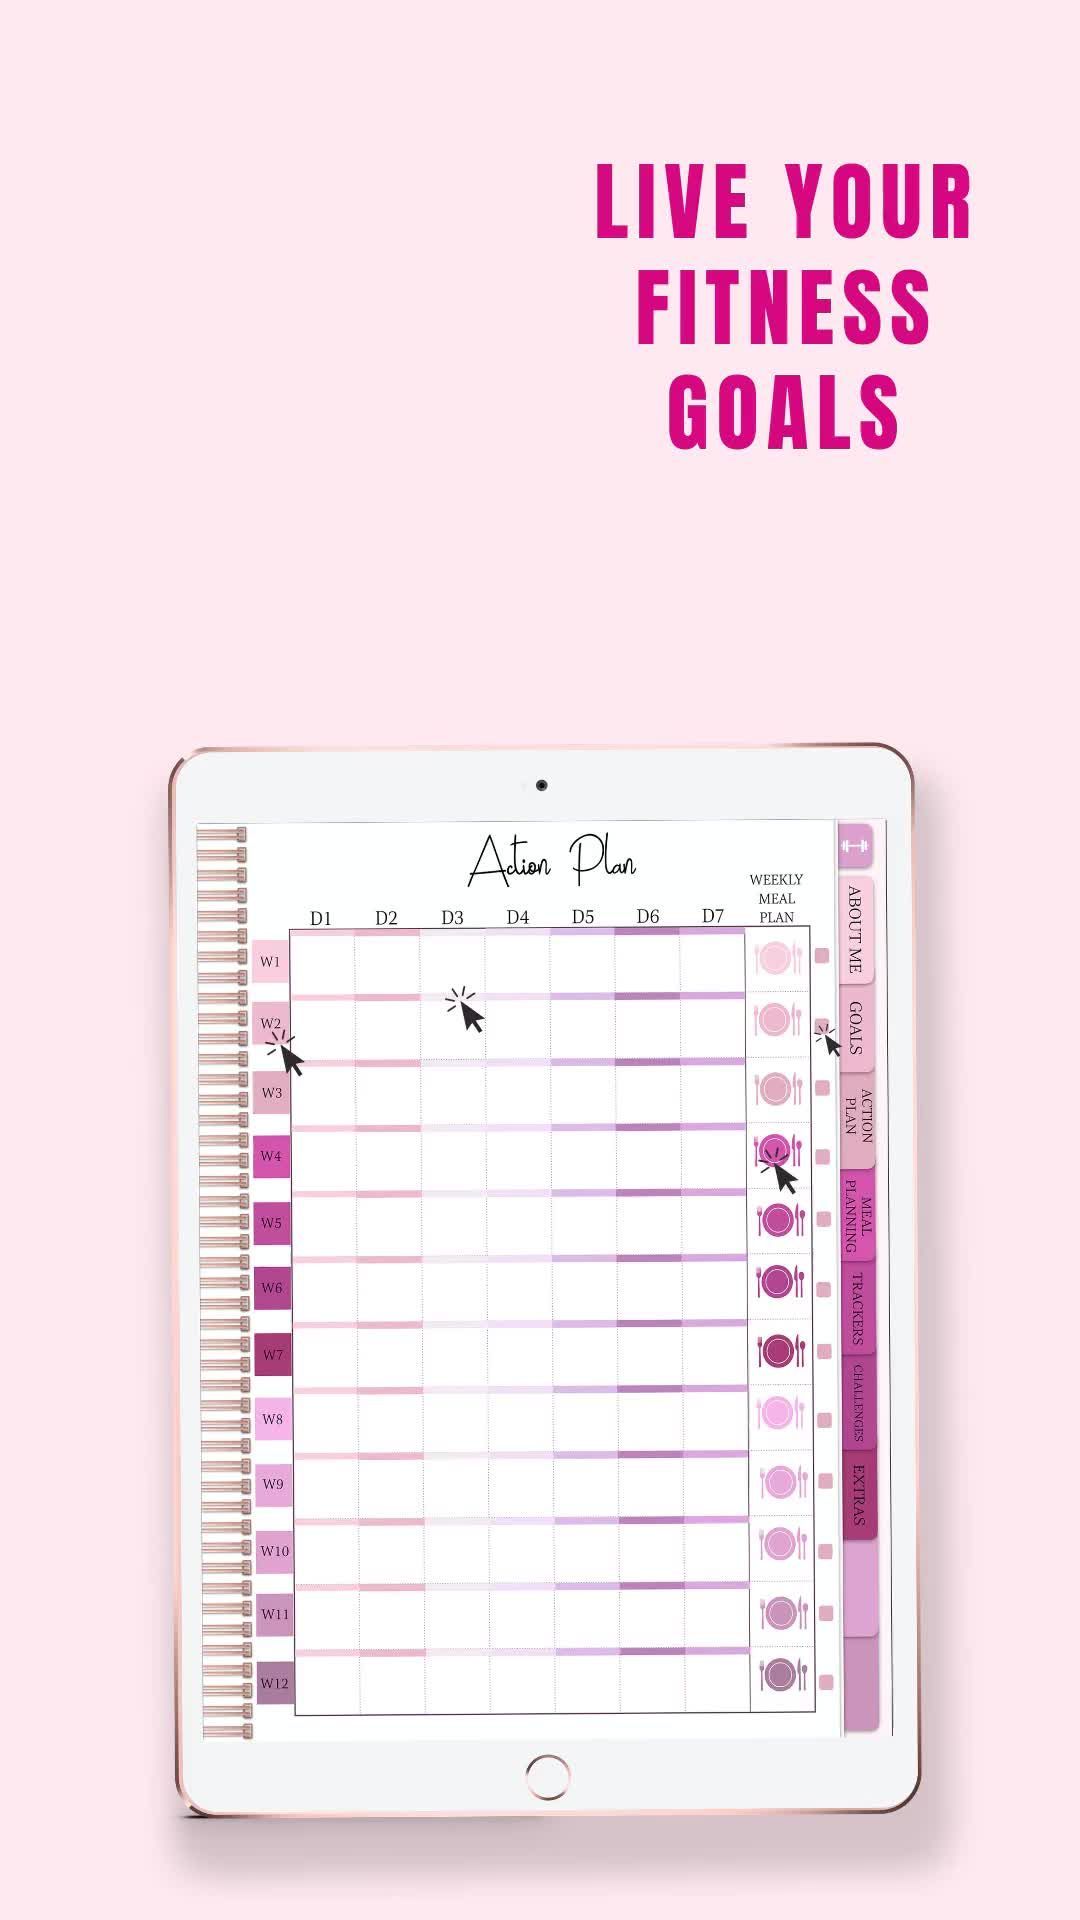 Fitness Doll Digital Fitness Planner• Workout Planner • Fitness Planner • Workout Tracker • Goodnote - Fitness Doll Digital Fitness Planner• Workout Planner • Fitness Planner • Workout Tracker • Goodnote -   15 fitness Planner for beginners ideas